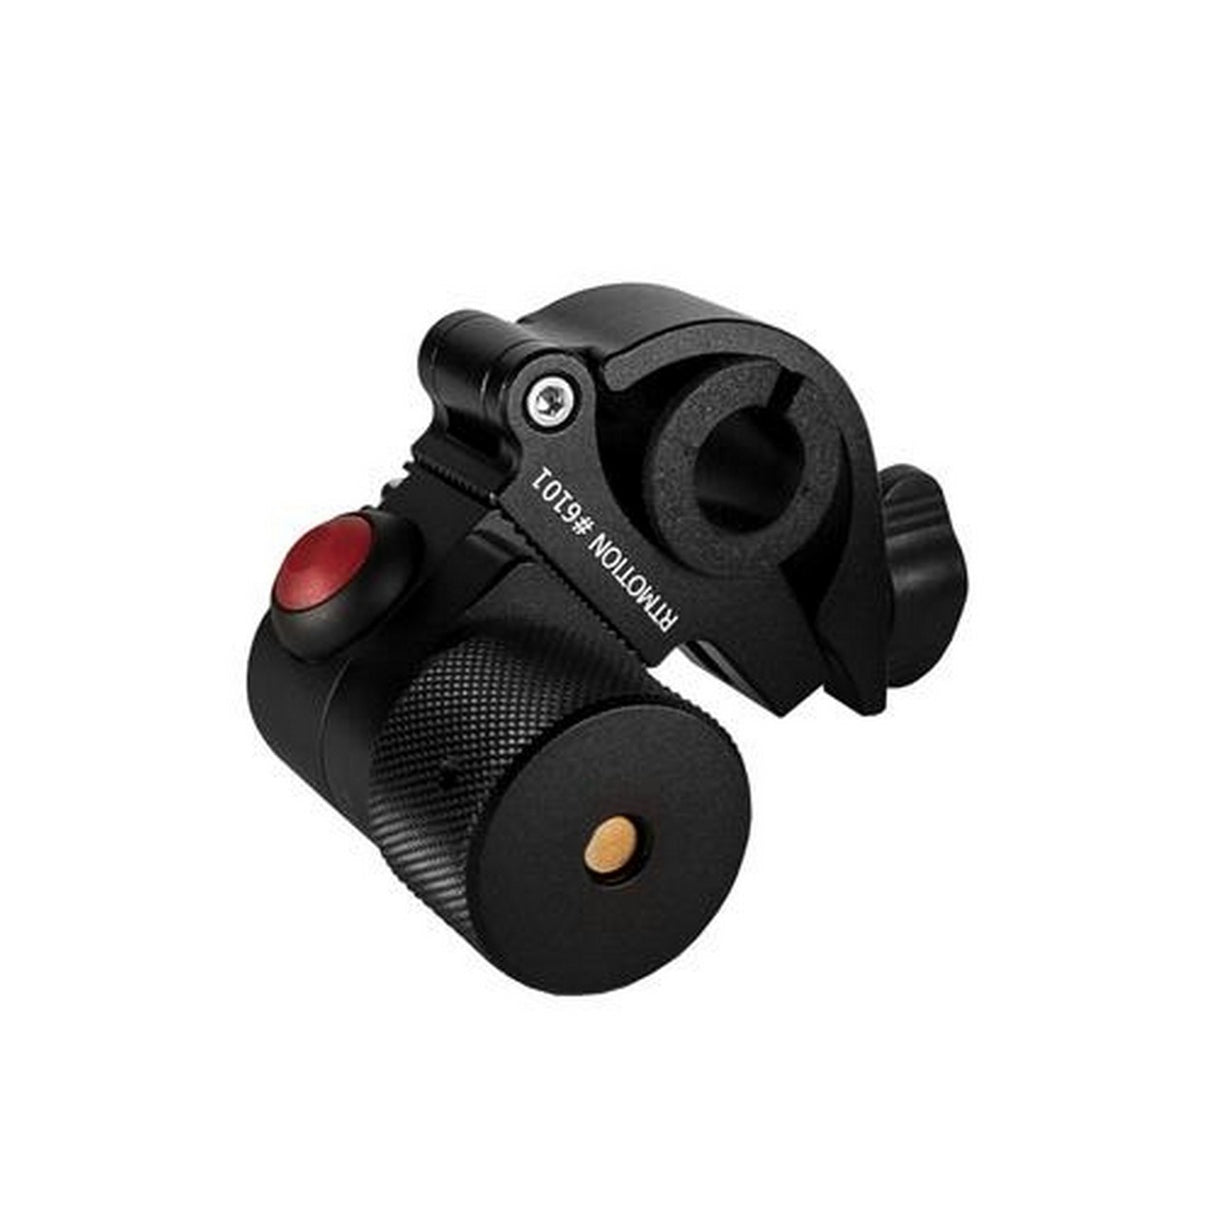 Teradek Wired Thumbwheel-S Controller with Run/Stop Control, Right Hand